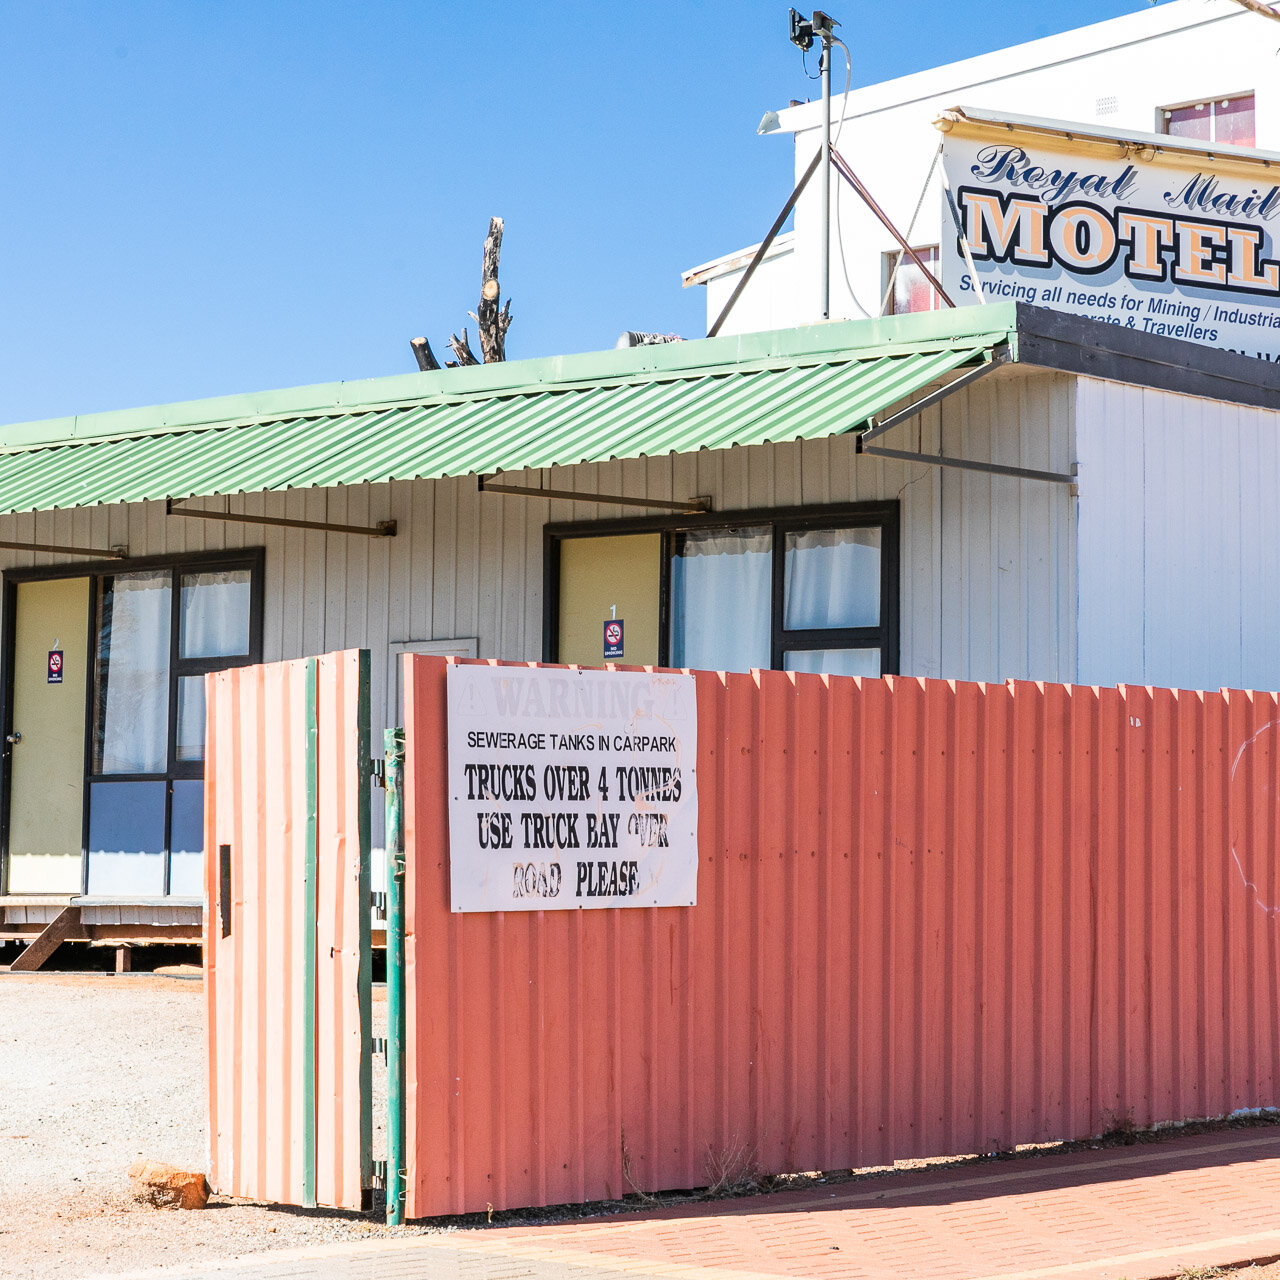 Not every motel has a sign warning of sewerage tanks in the car park! The Royal Motel in Meekatharra